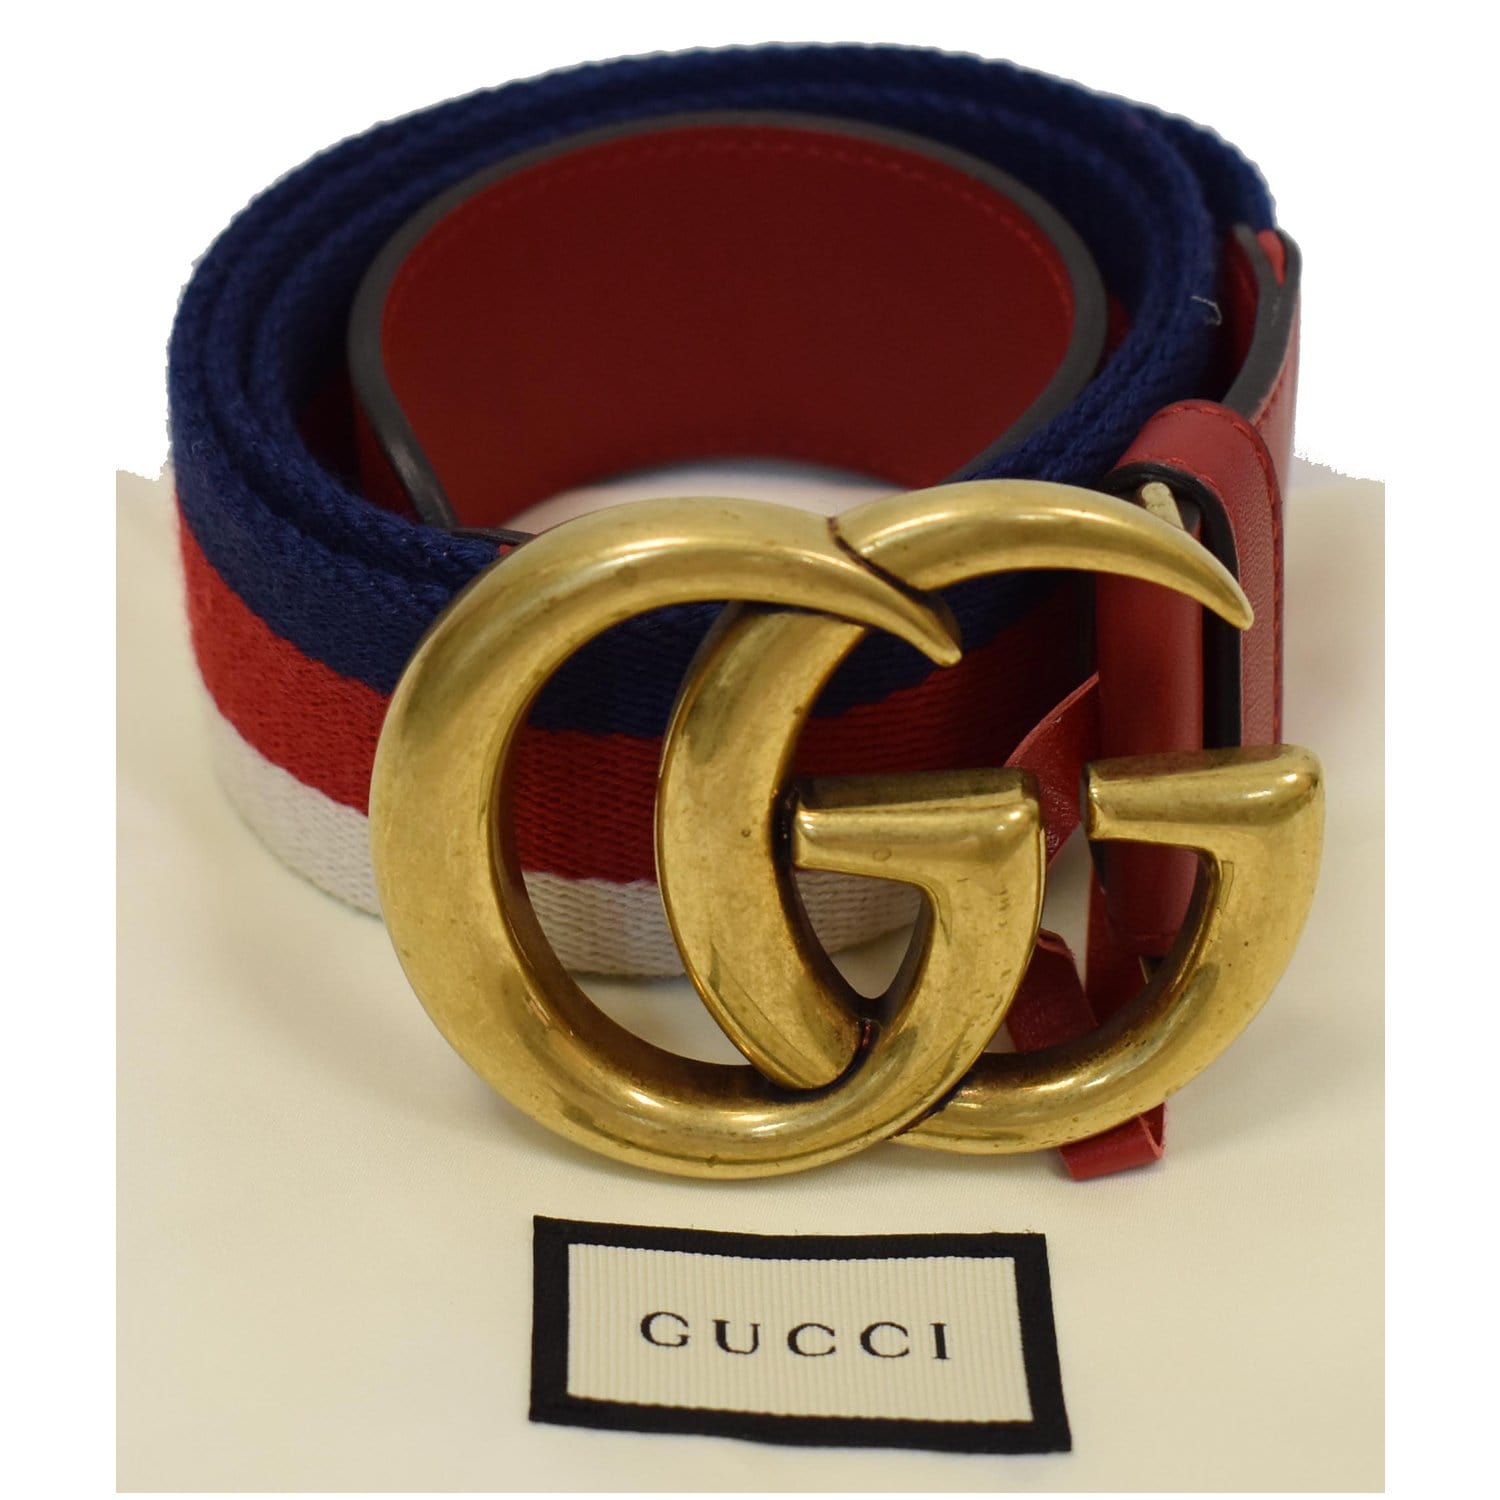 FRO4S Women's Fashion Double G Buckle Leather Belt